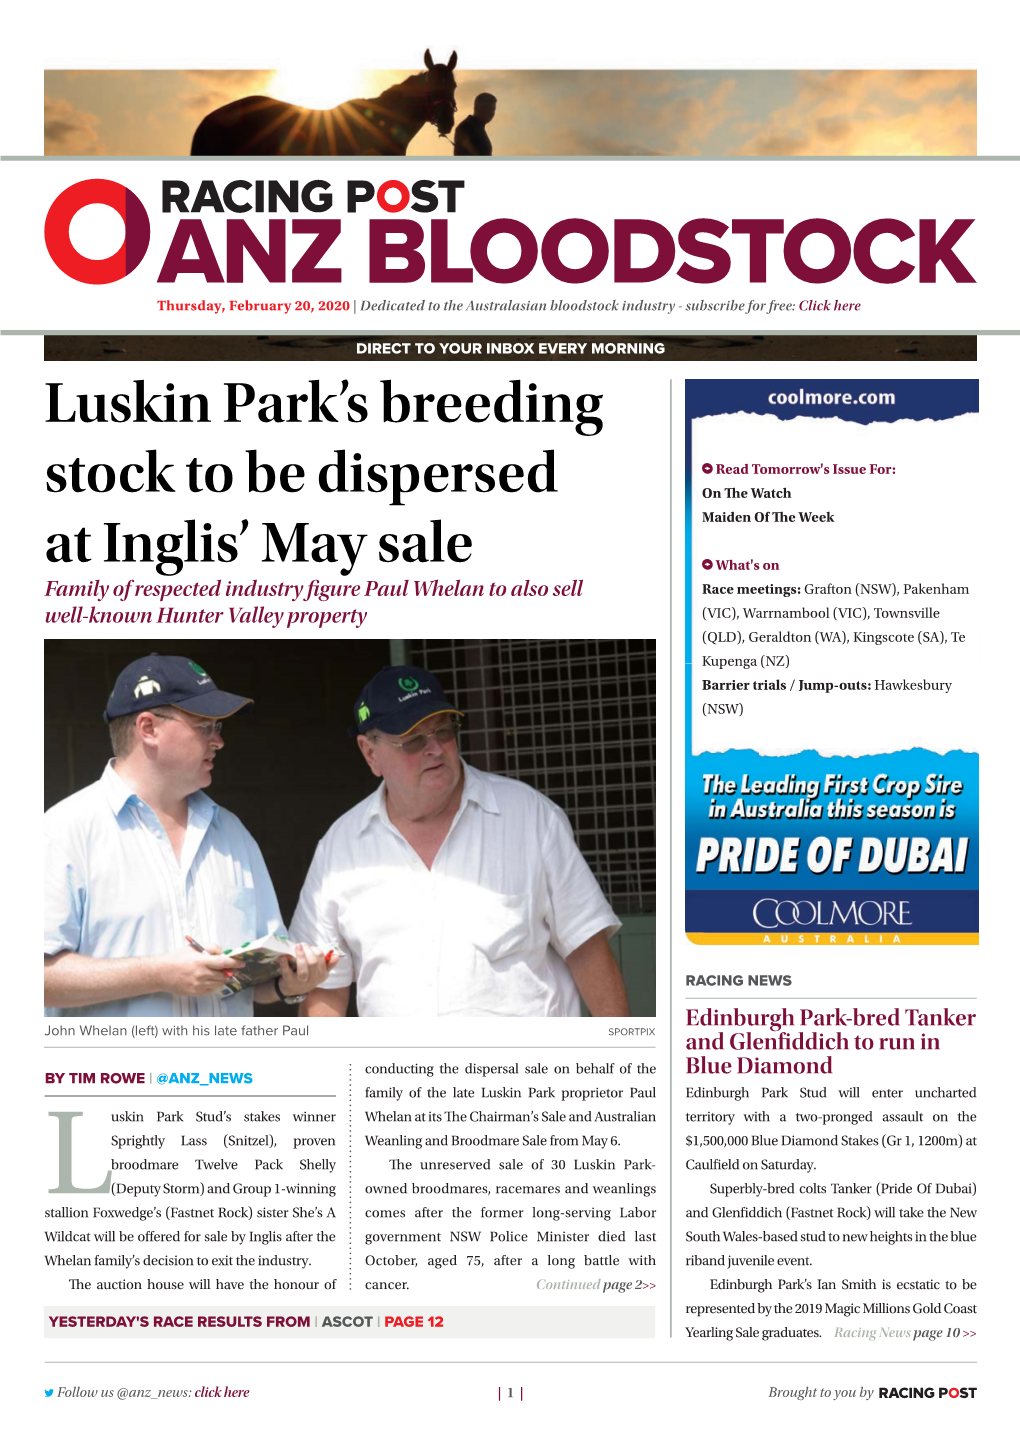 Luskin Park's Breeding Stock to Be Dispersed at Inglis' May Sale